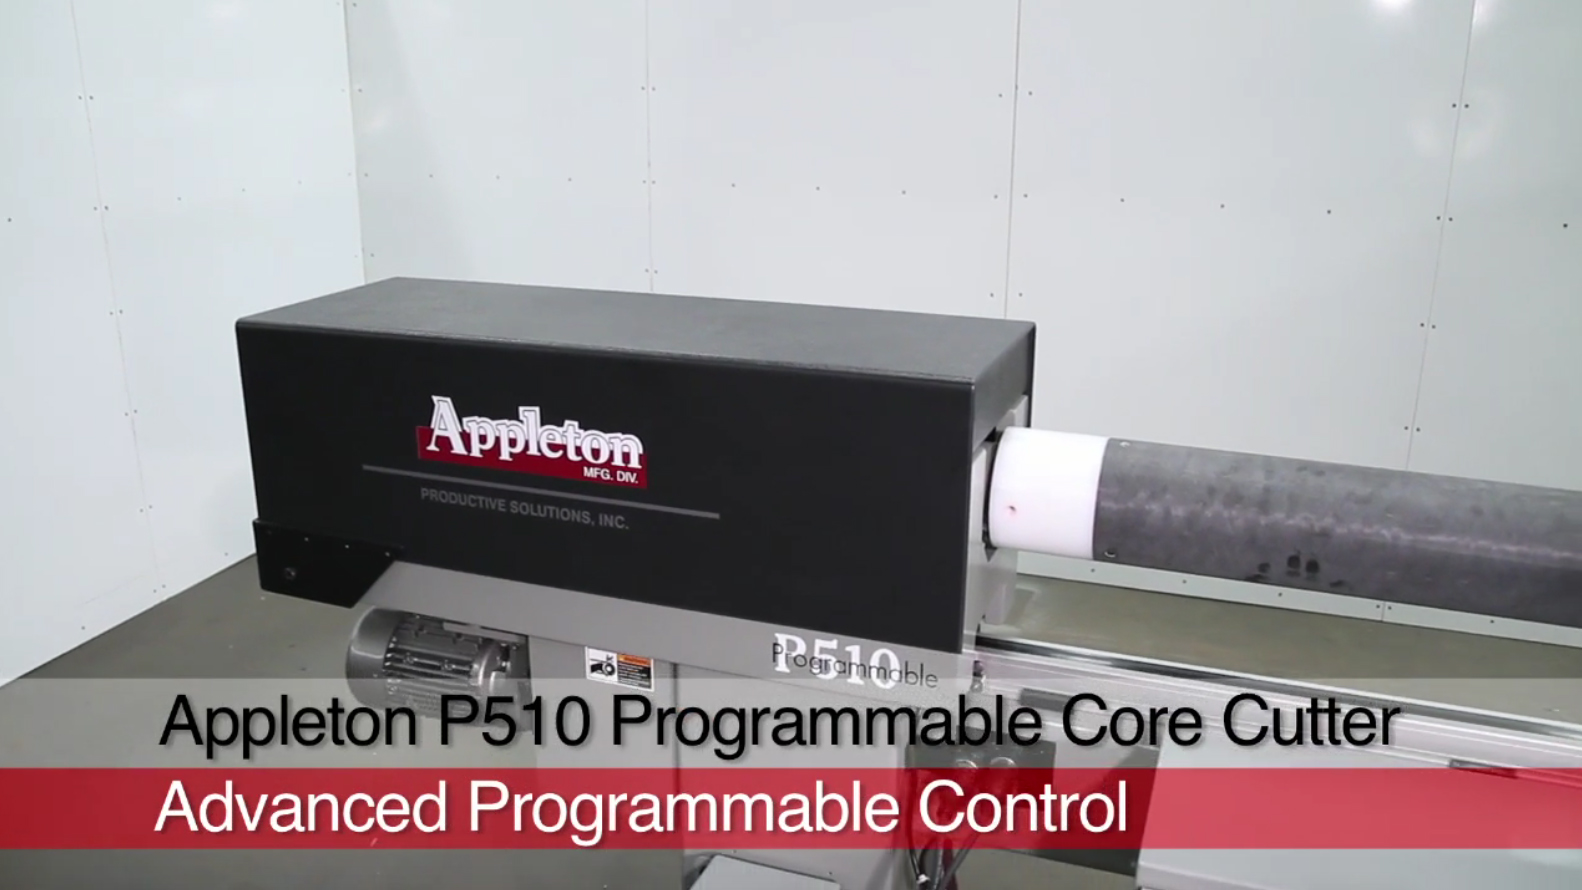 P510 Programmable Core Cutters